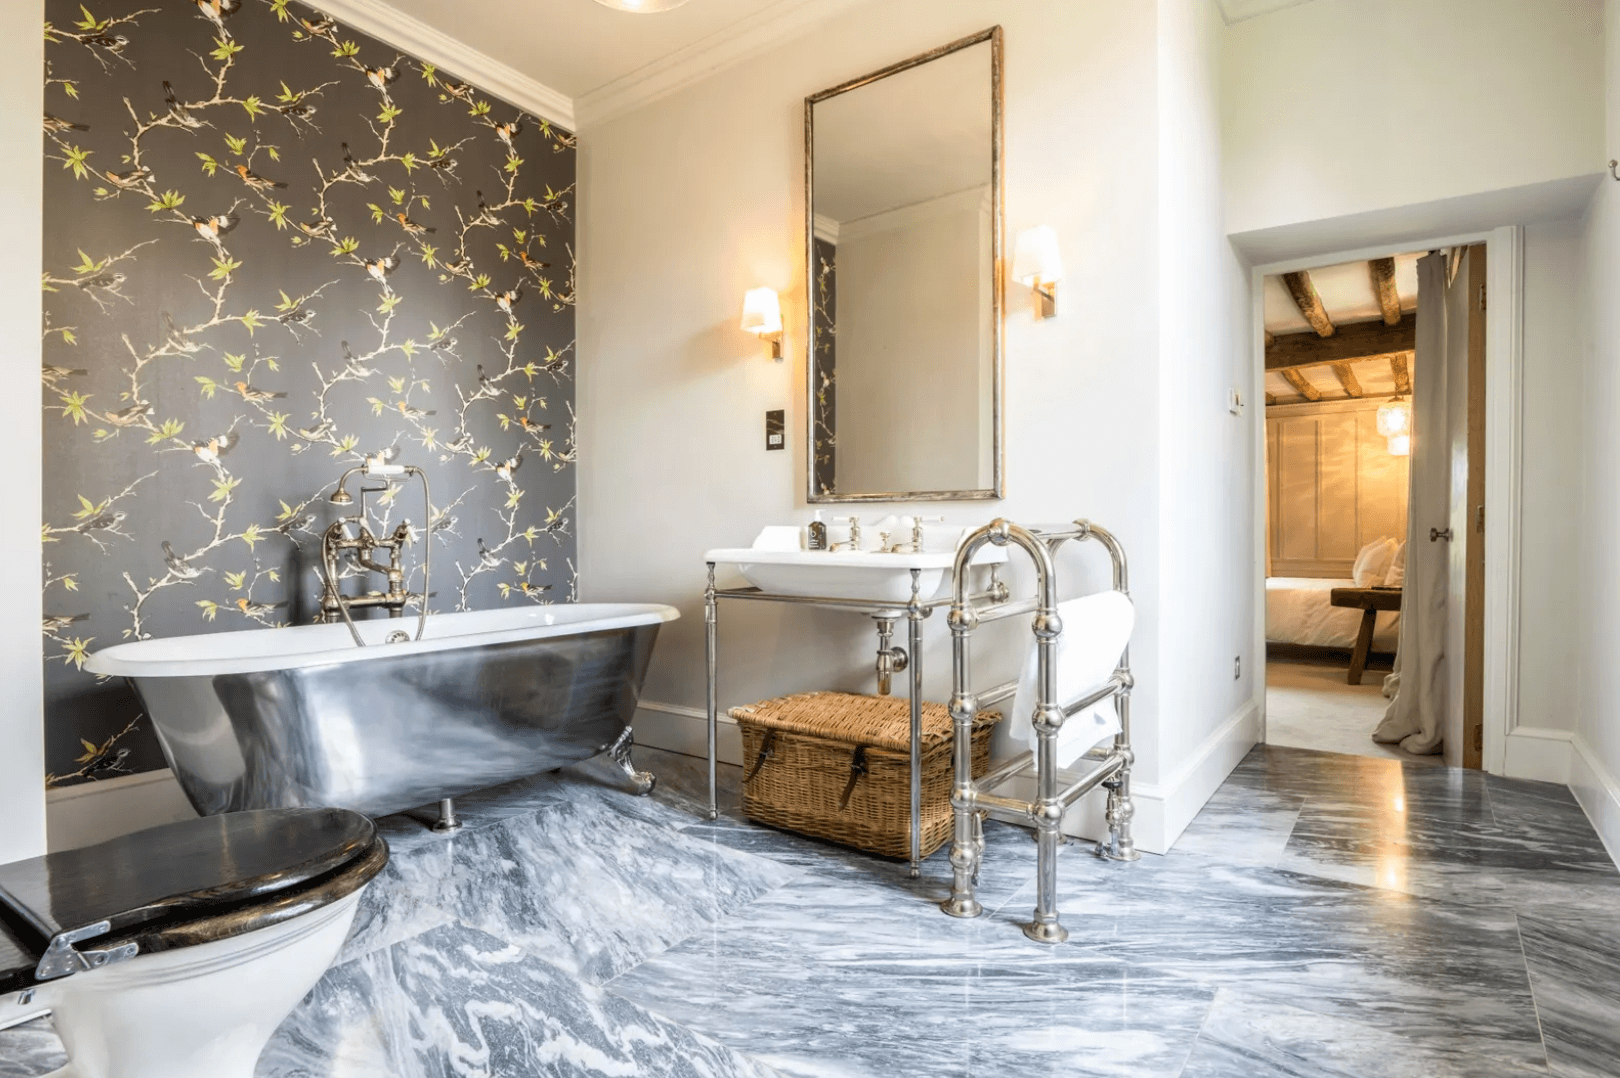 One of the ensuite bathrooms in one of the manor’s main bedrooms